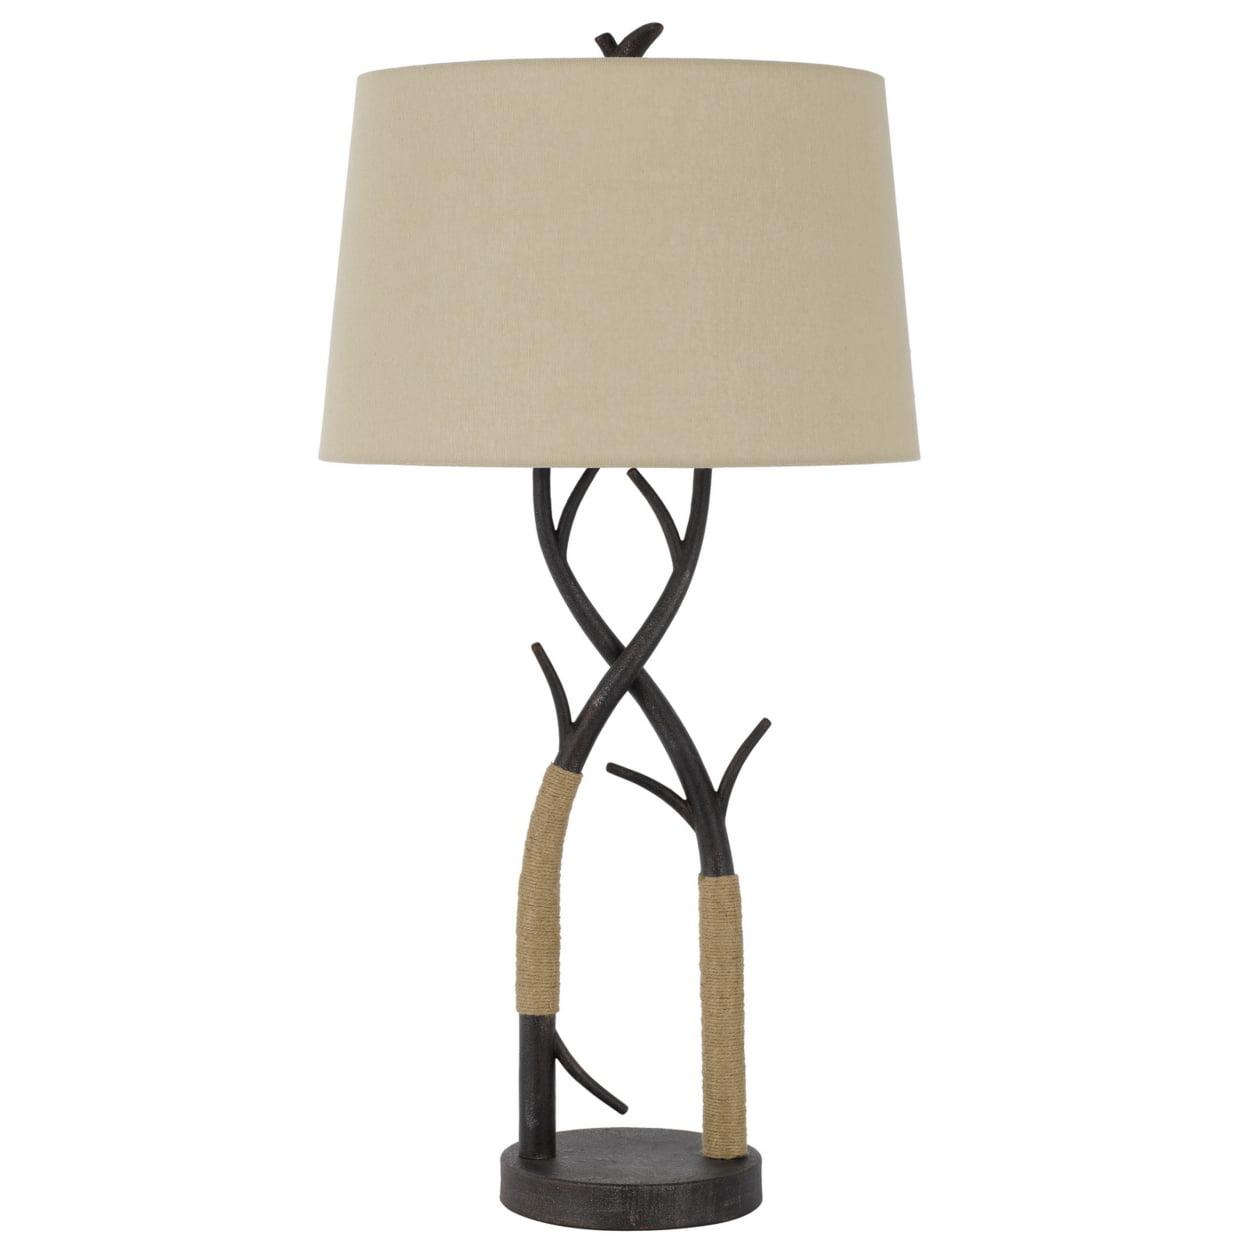 32" Black Metal Tree Branch Table Lamp with Linen Shade